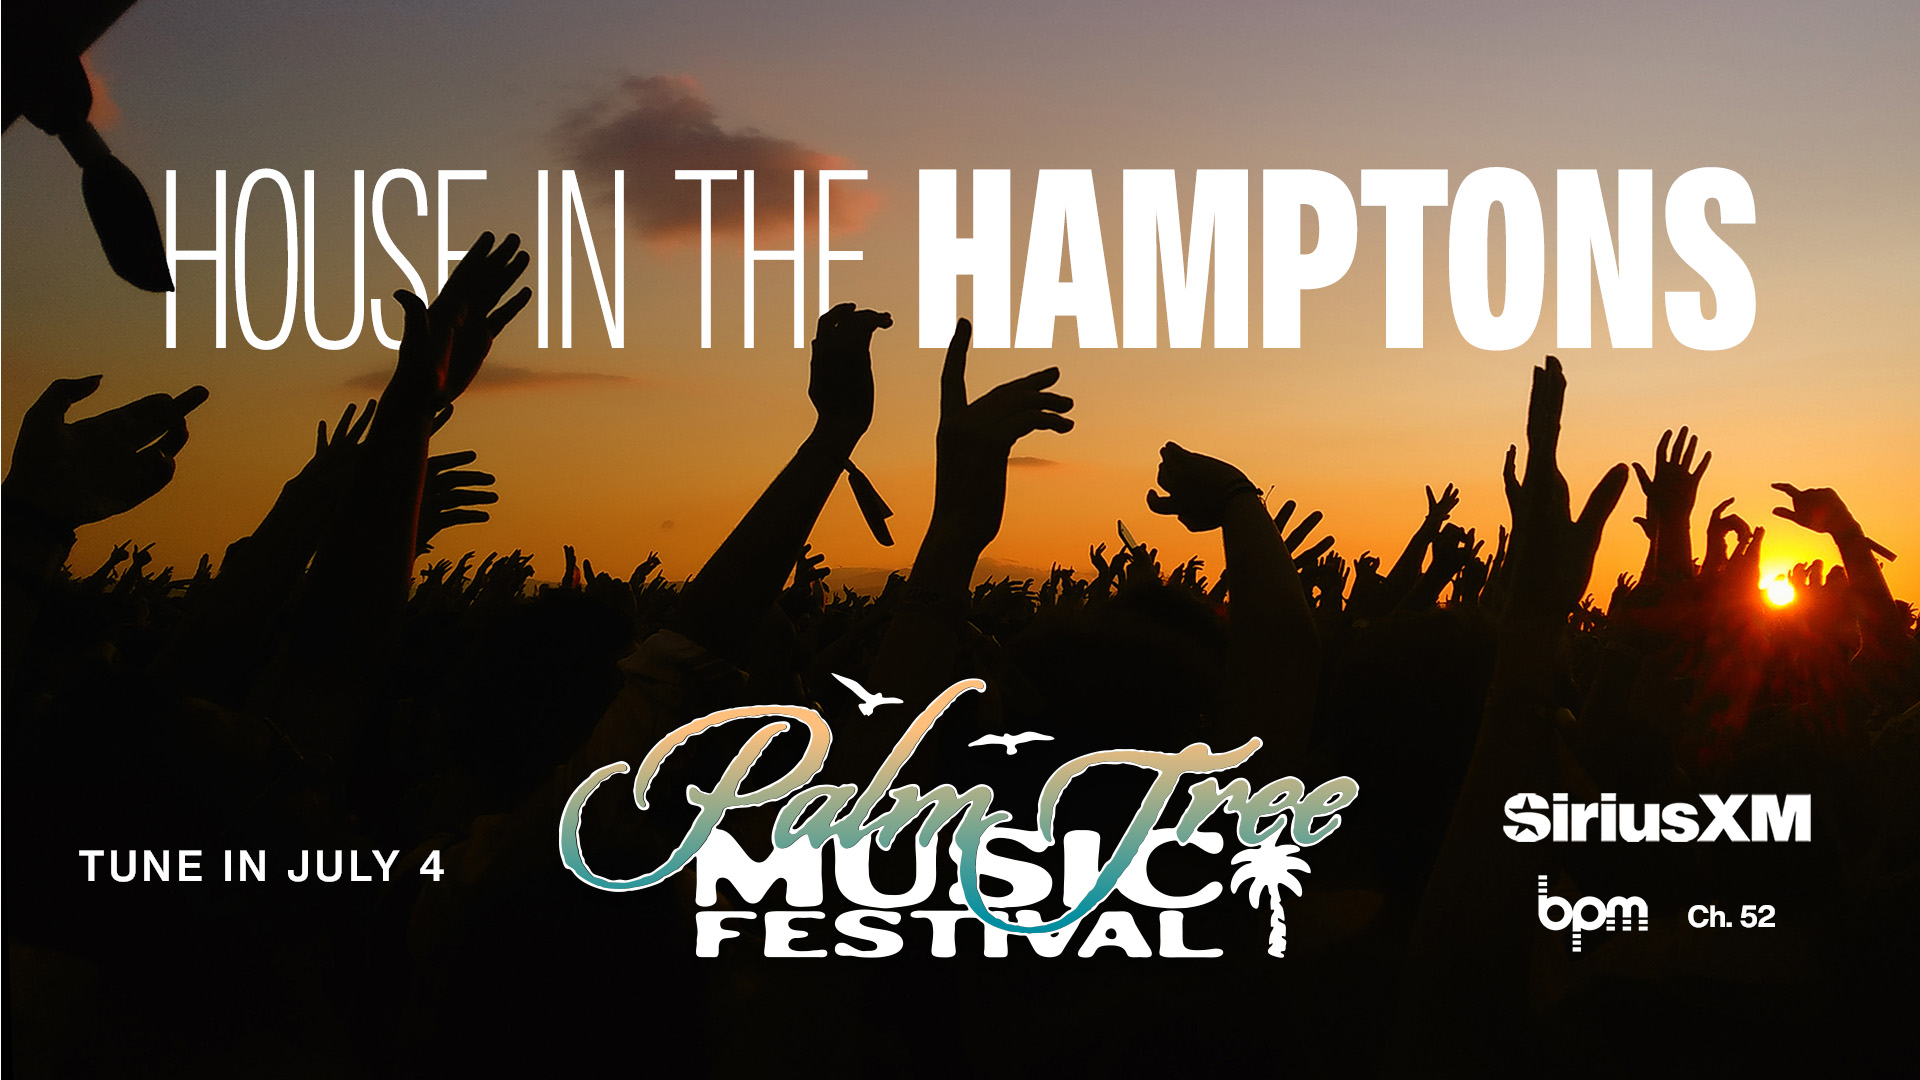 House In the Hamptons - Palm Tree Music Festival - July 4 on SiriusXM's BPM Channel